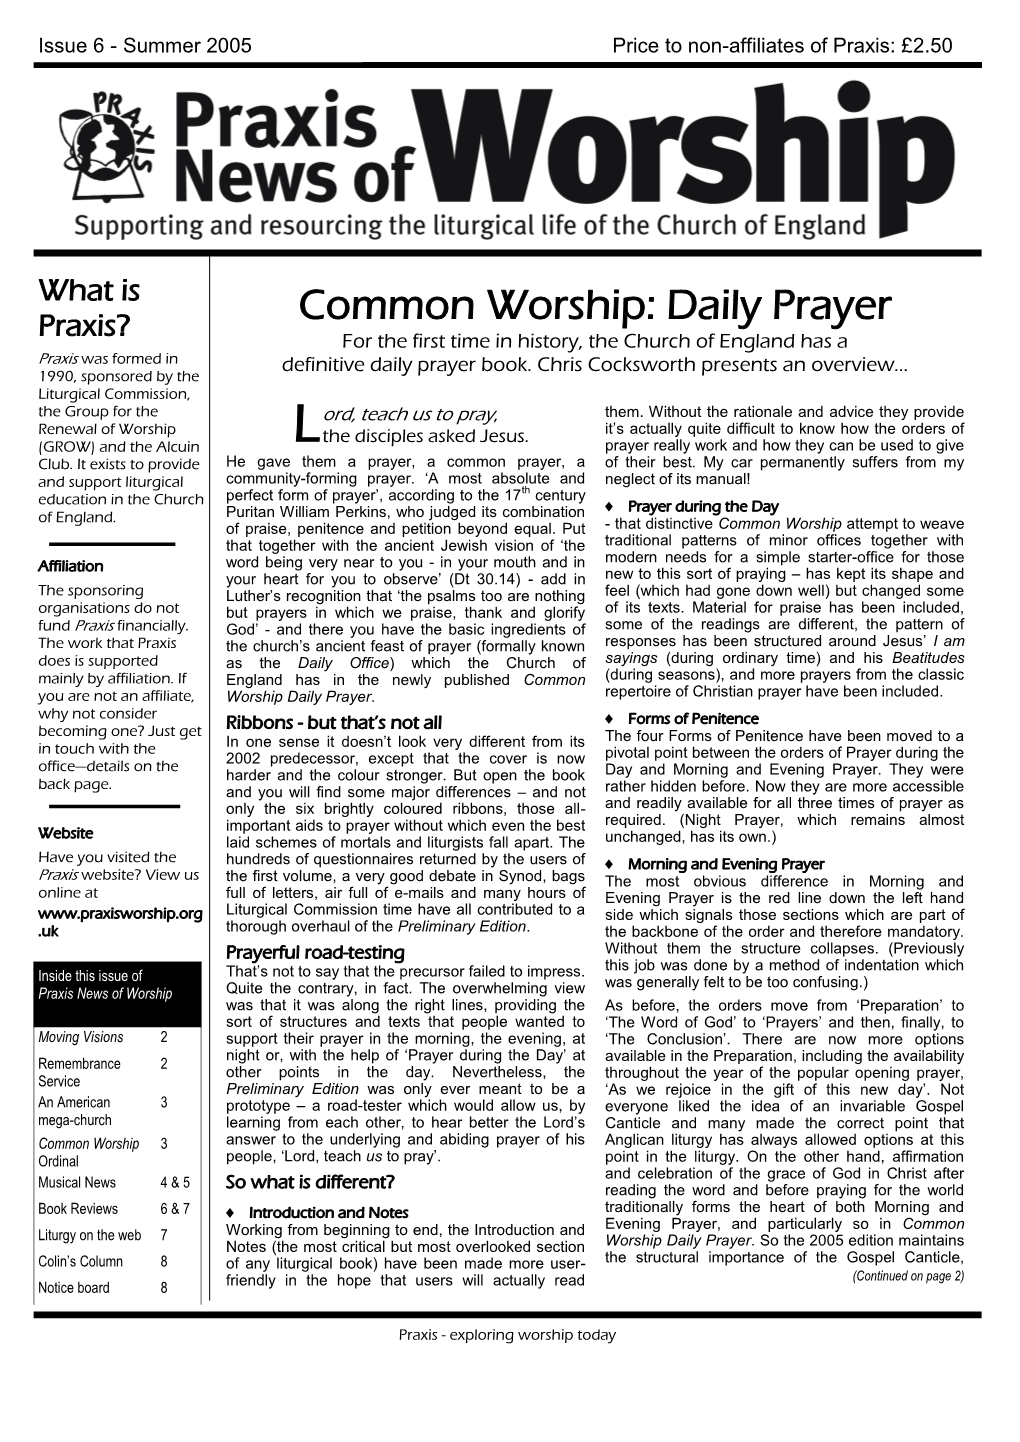 Common Worship: Daily Prayer Praxis? for the First Time in History, the Church of England Has a Praxis Was Formed in Definitive Daily Prayer Book